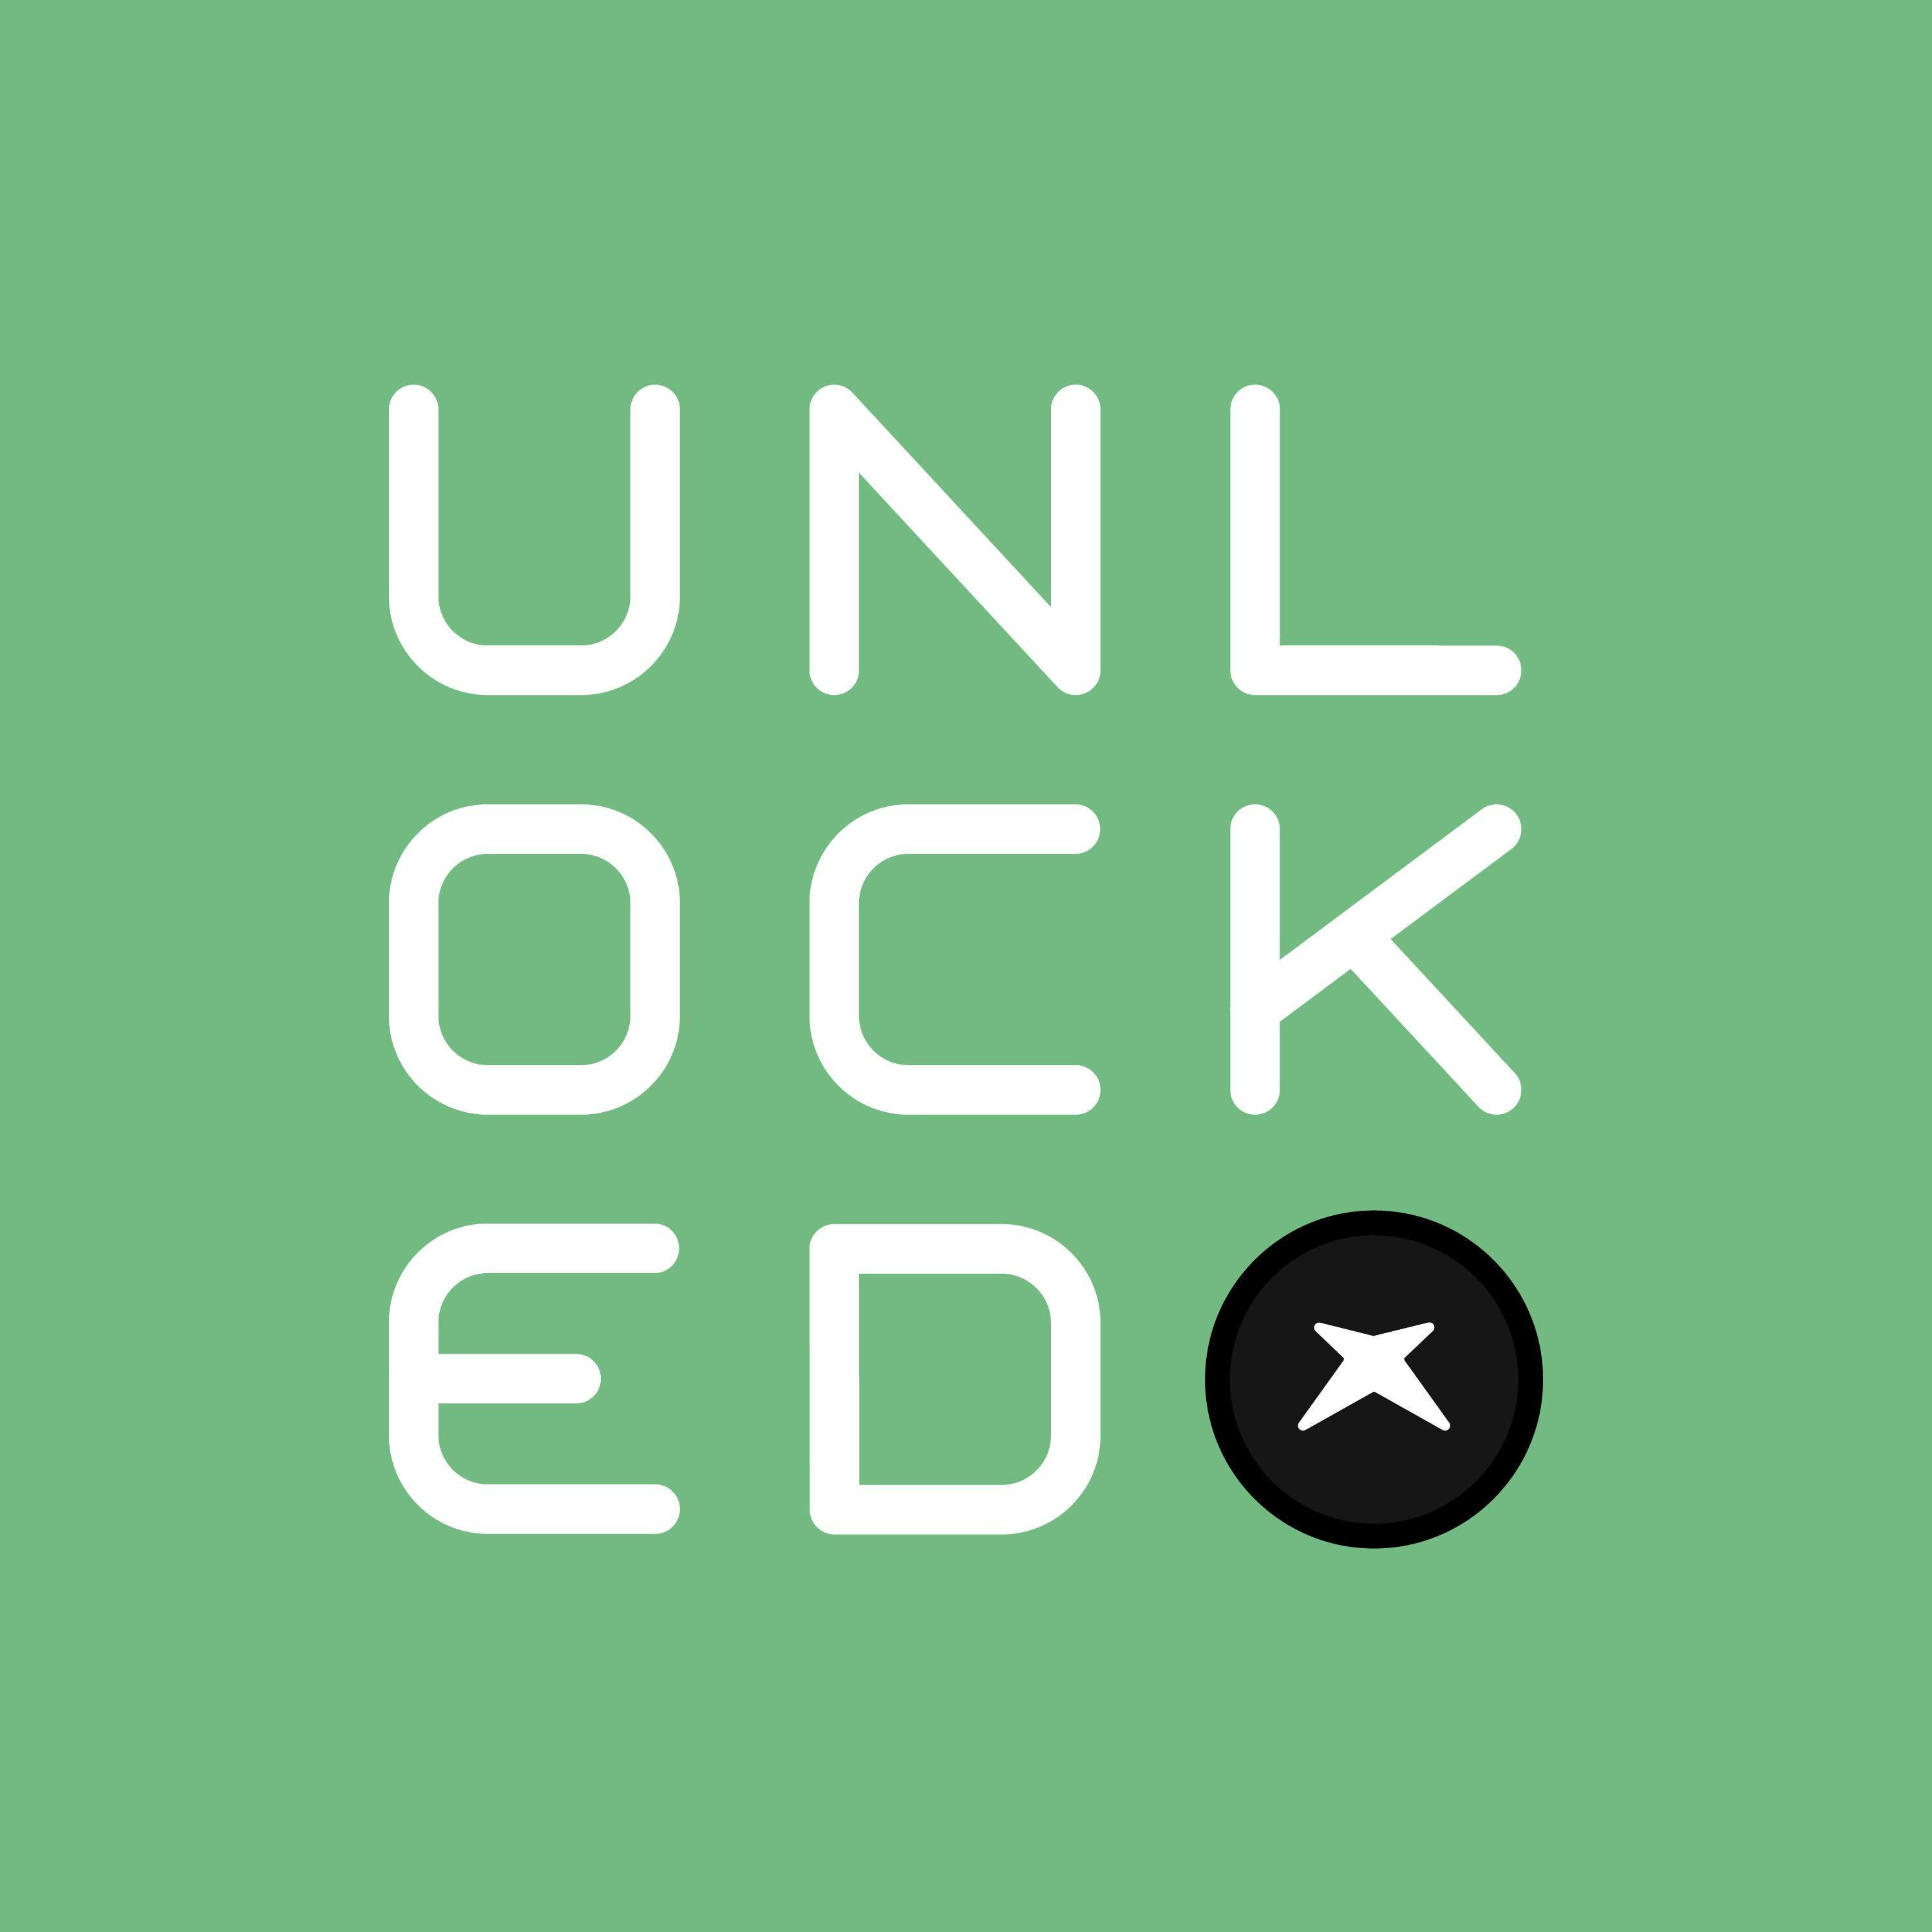 Podcast Unlocked Episode 105: Jose From the Bronx